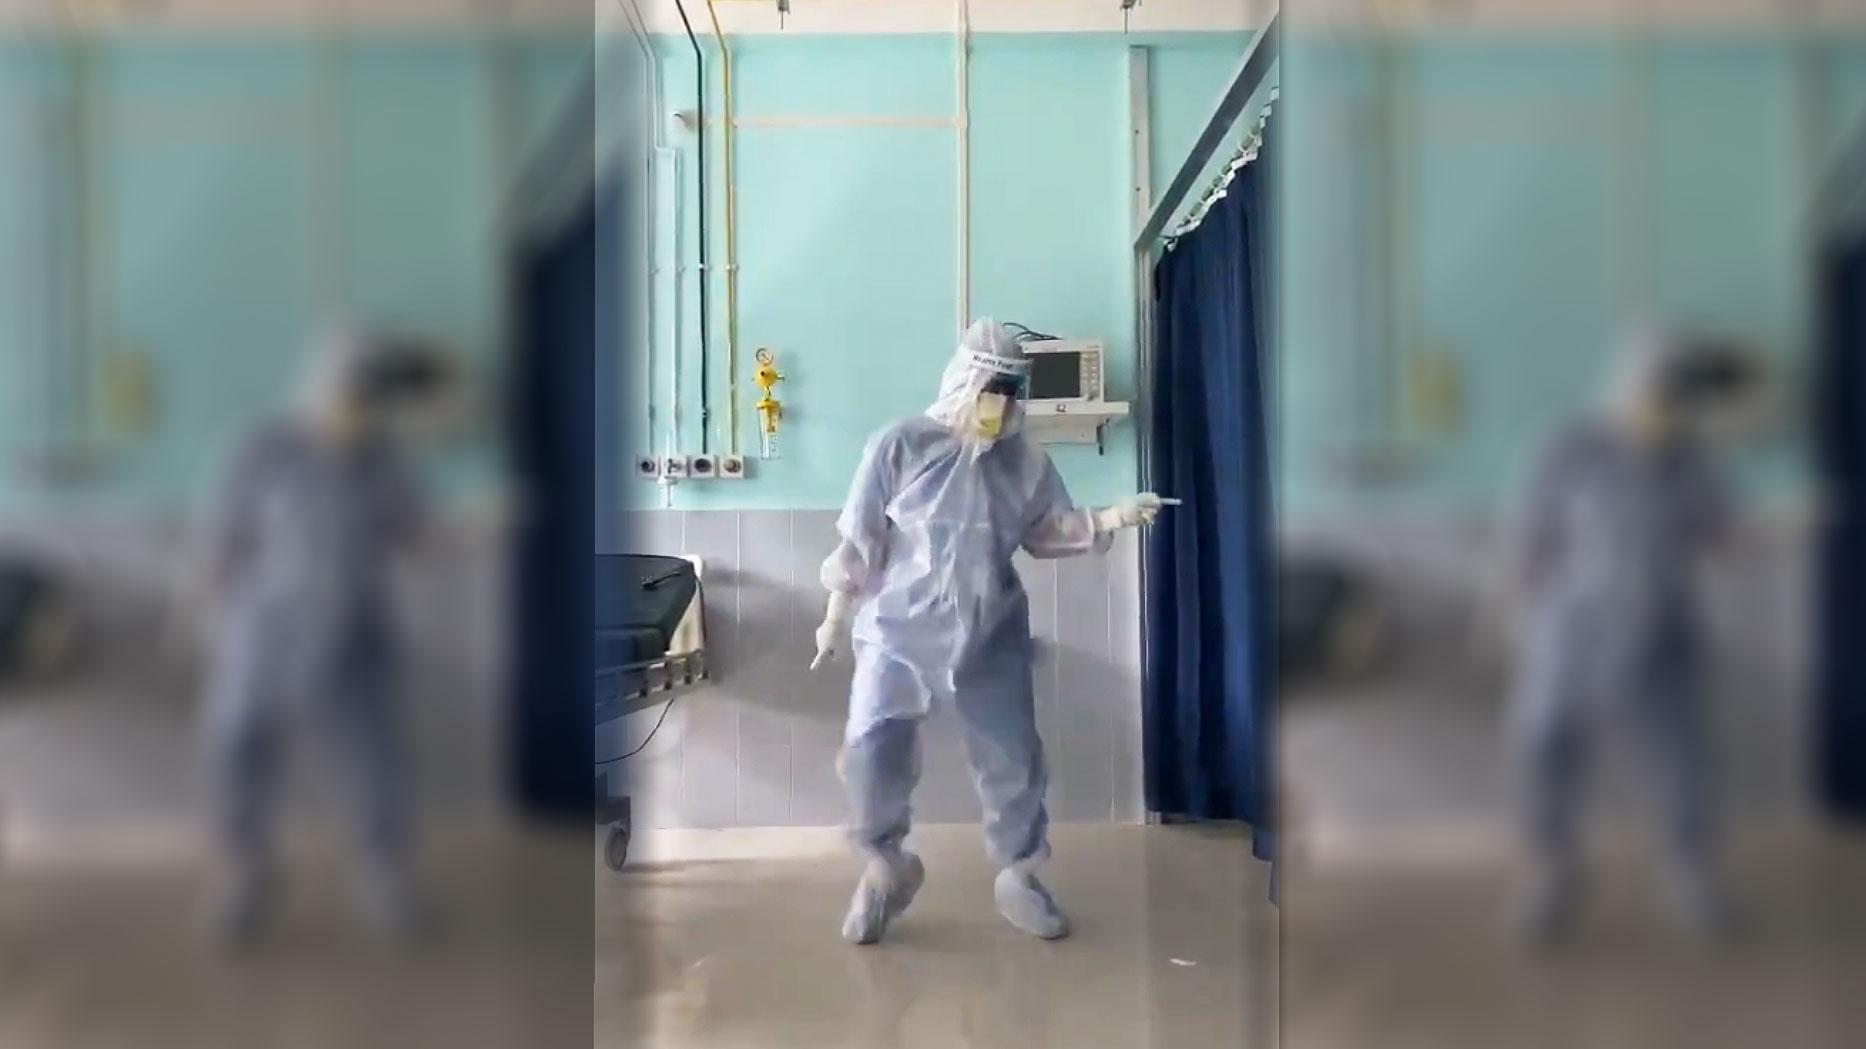 Dr. Arup Senapati is shown in full medical personal protective equipment and dancing in a hospital.